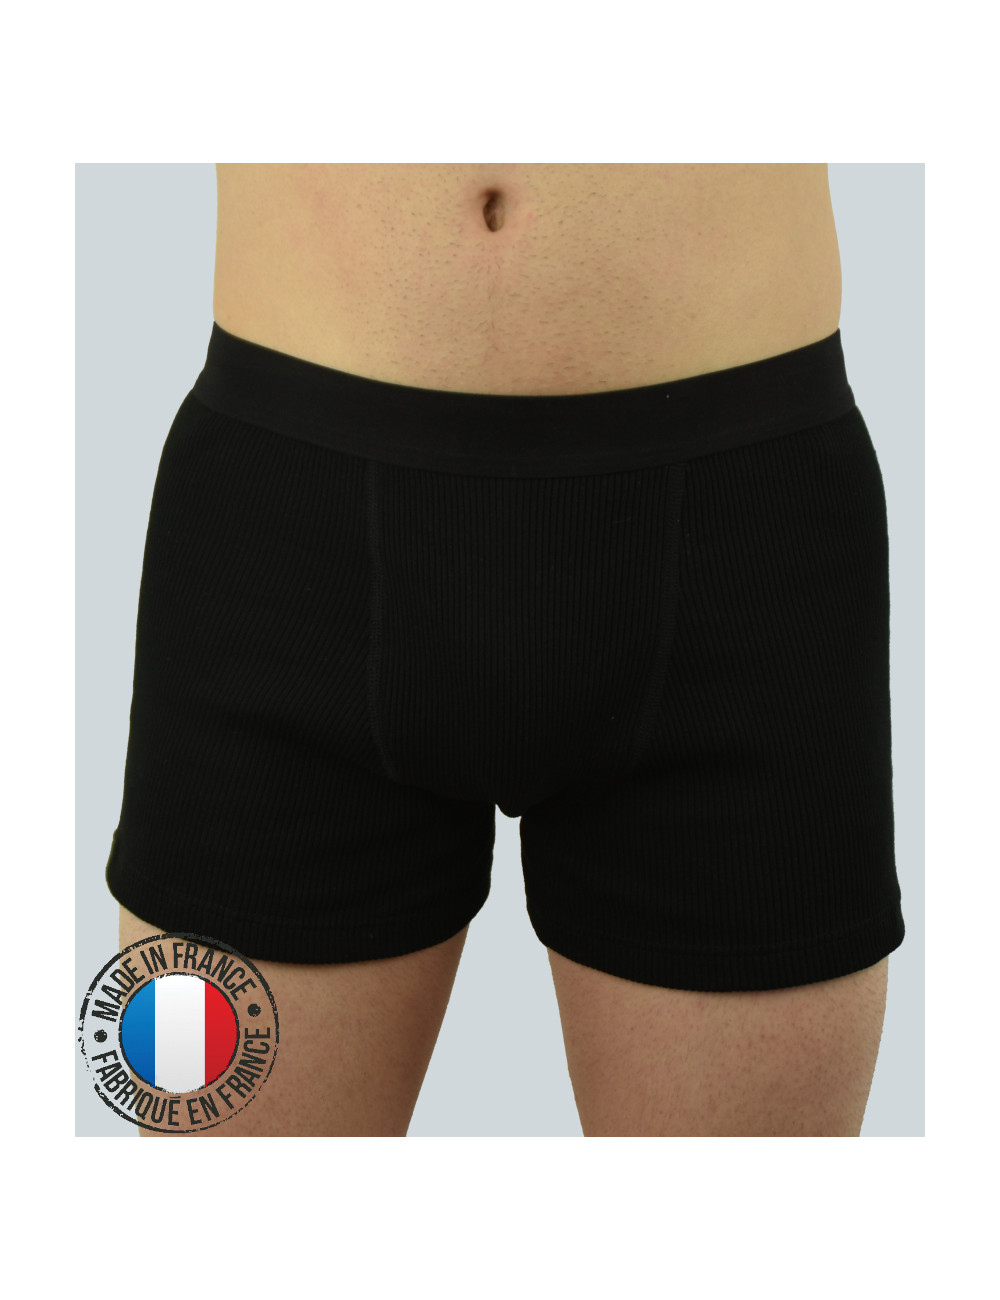 Boxer confortable made in France